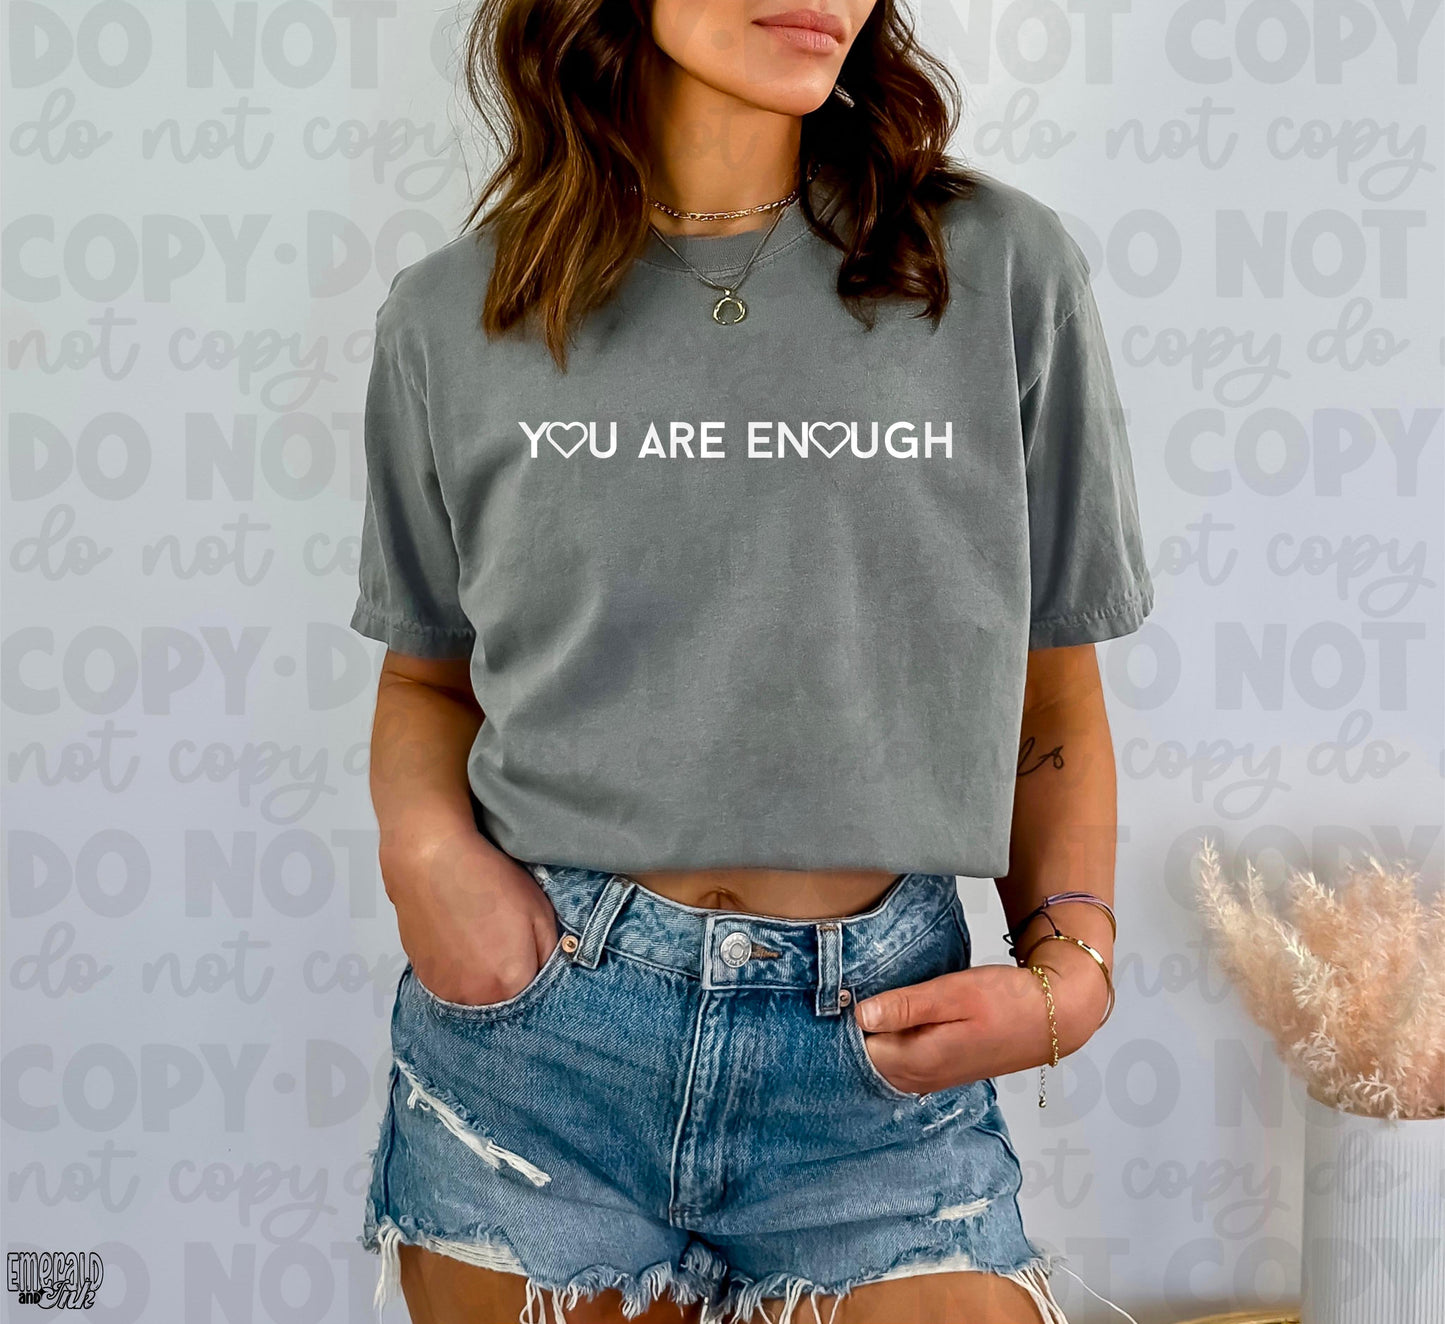 You are enough (3 to a sheet) - screen print transfer